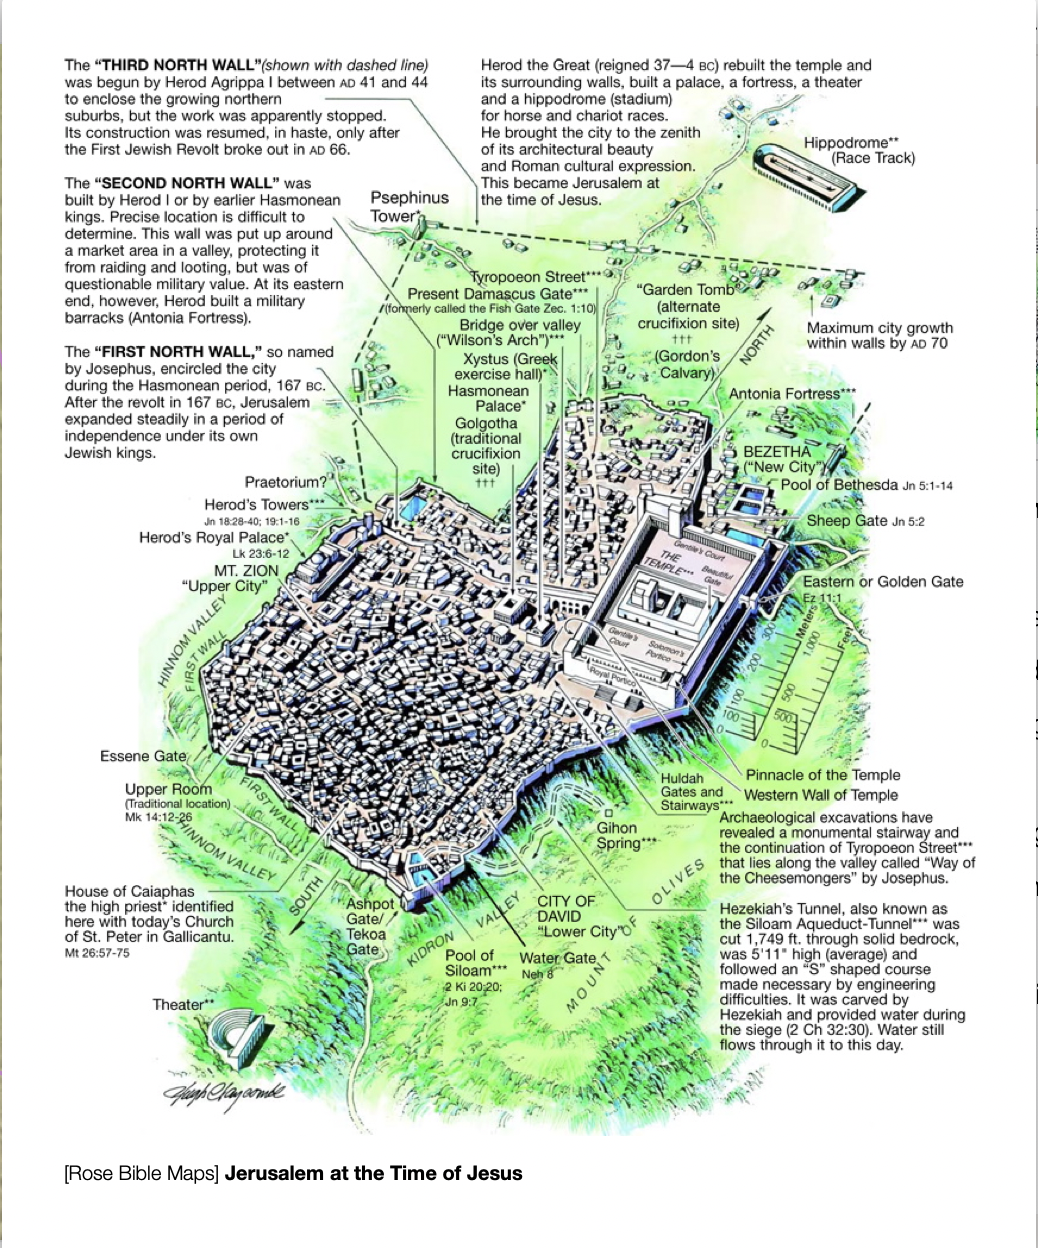 A 3D Map of Jerusalem at the time of Jesus.